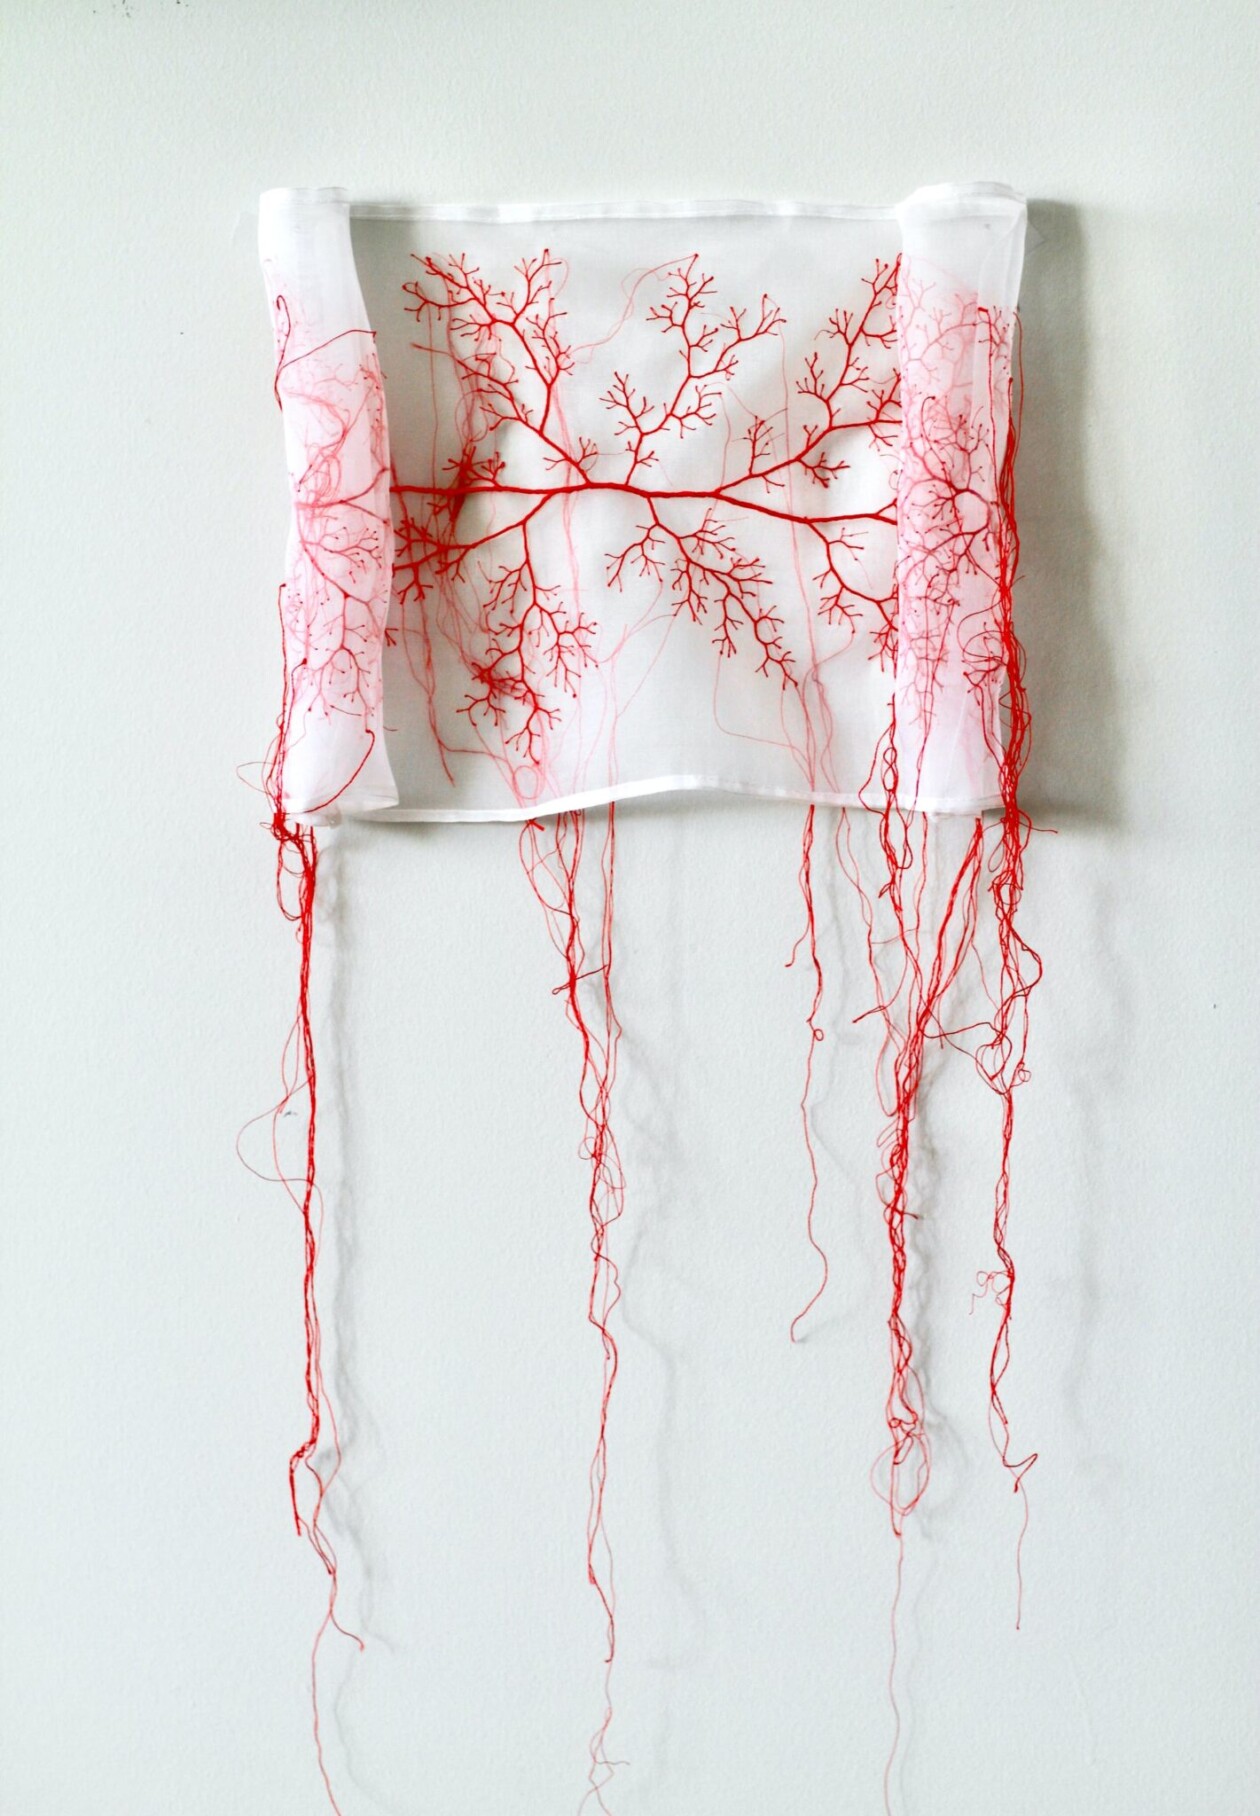 Red Threads, Intriguing Mixed Media Sculptures By Rima Day (8)